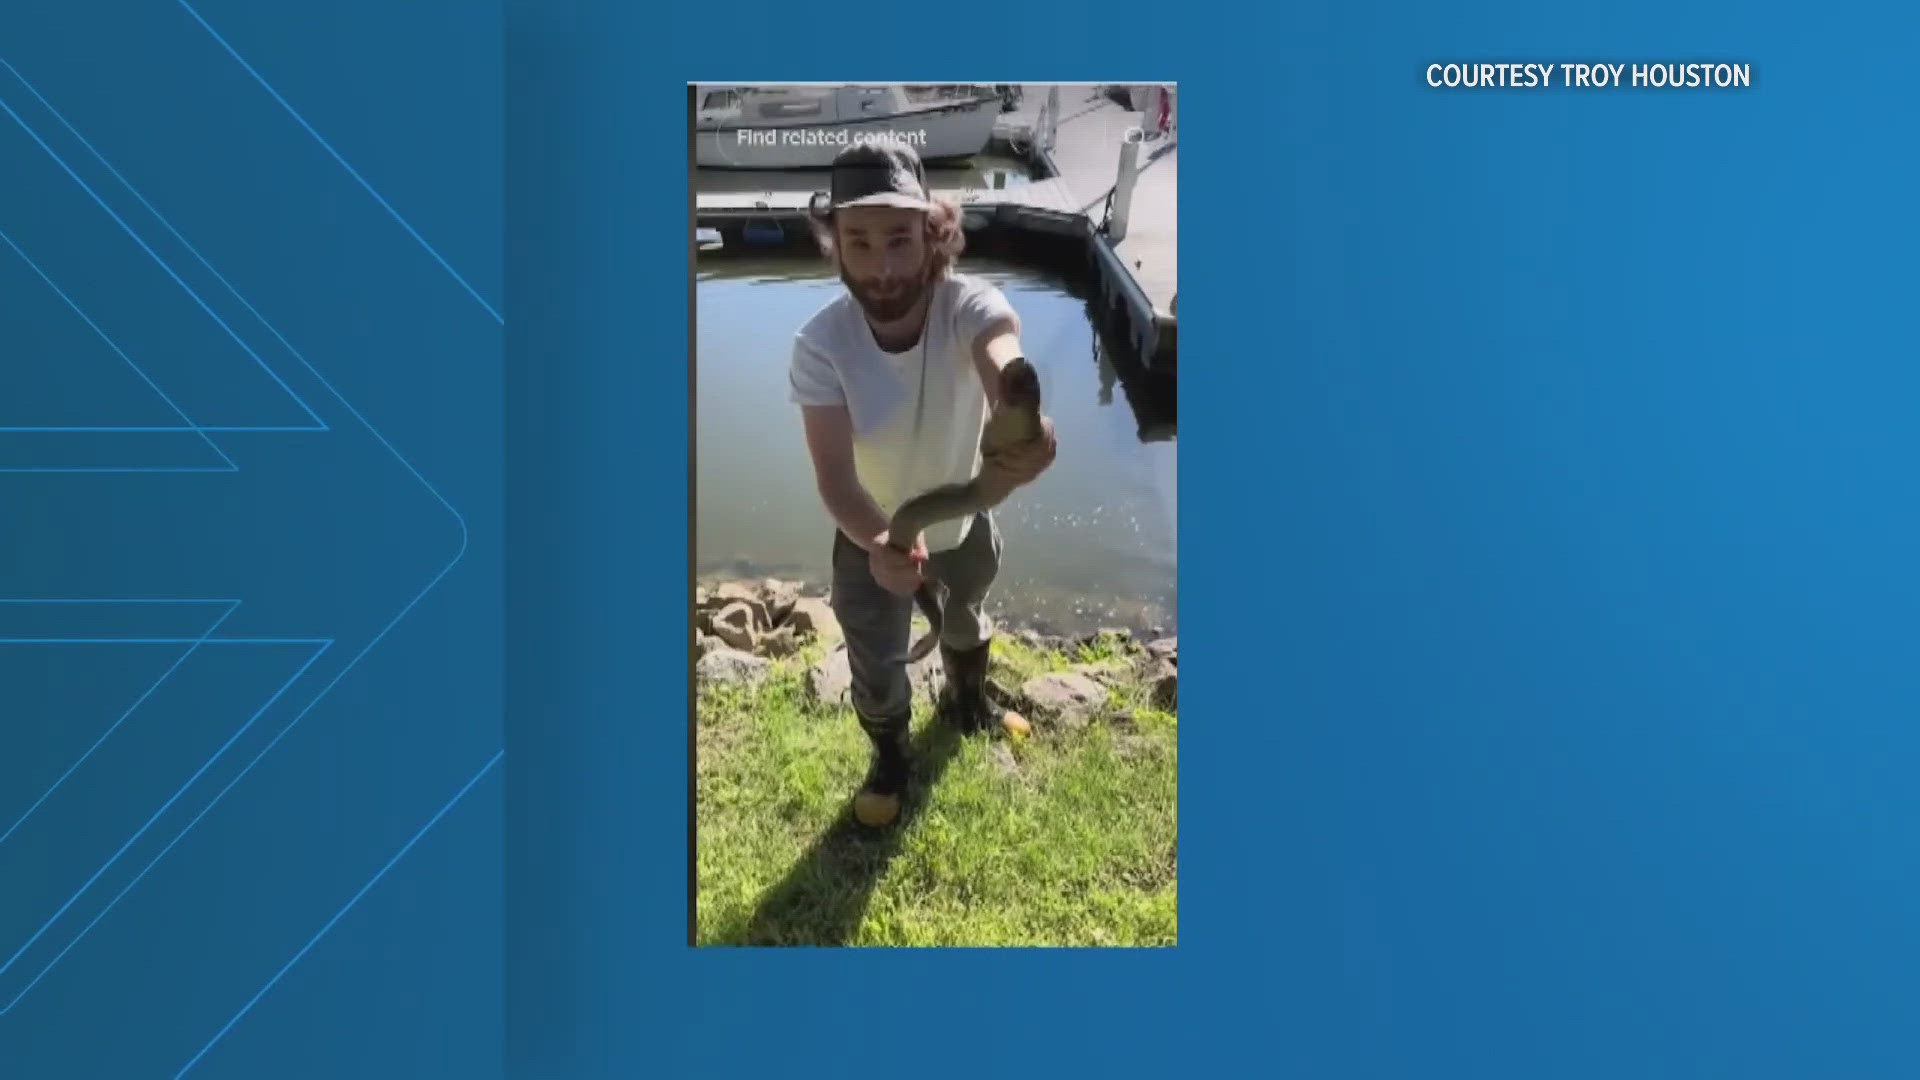 Man believed he was catching a friendly eel and was quickly surprised when it was in fact a leech of the sea.